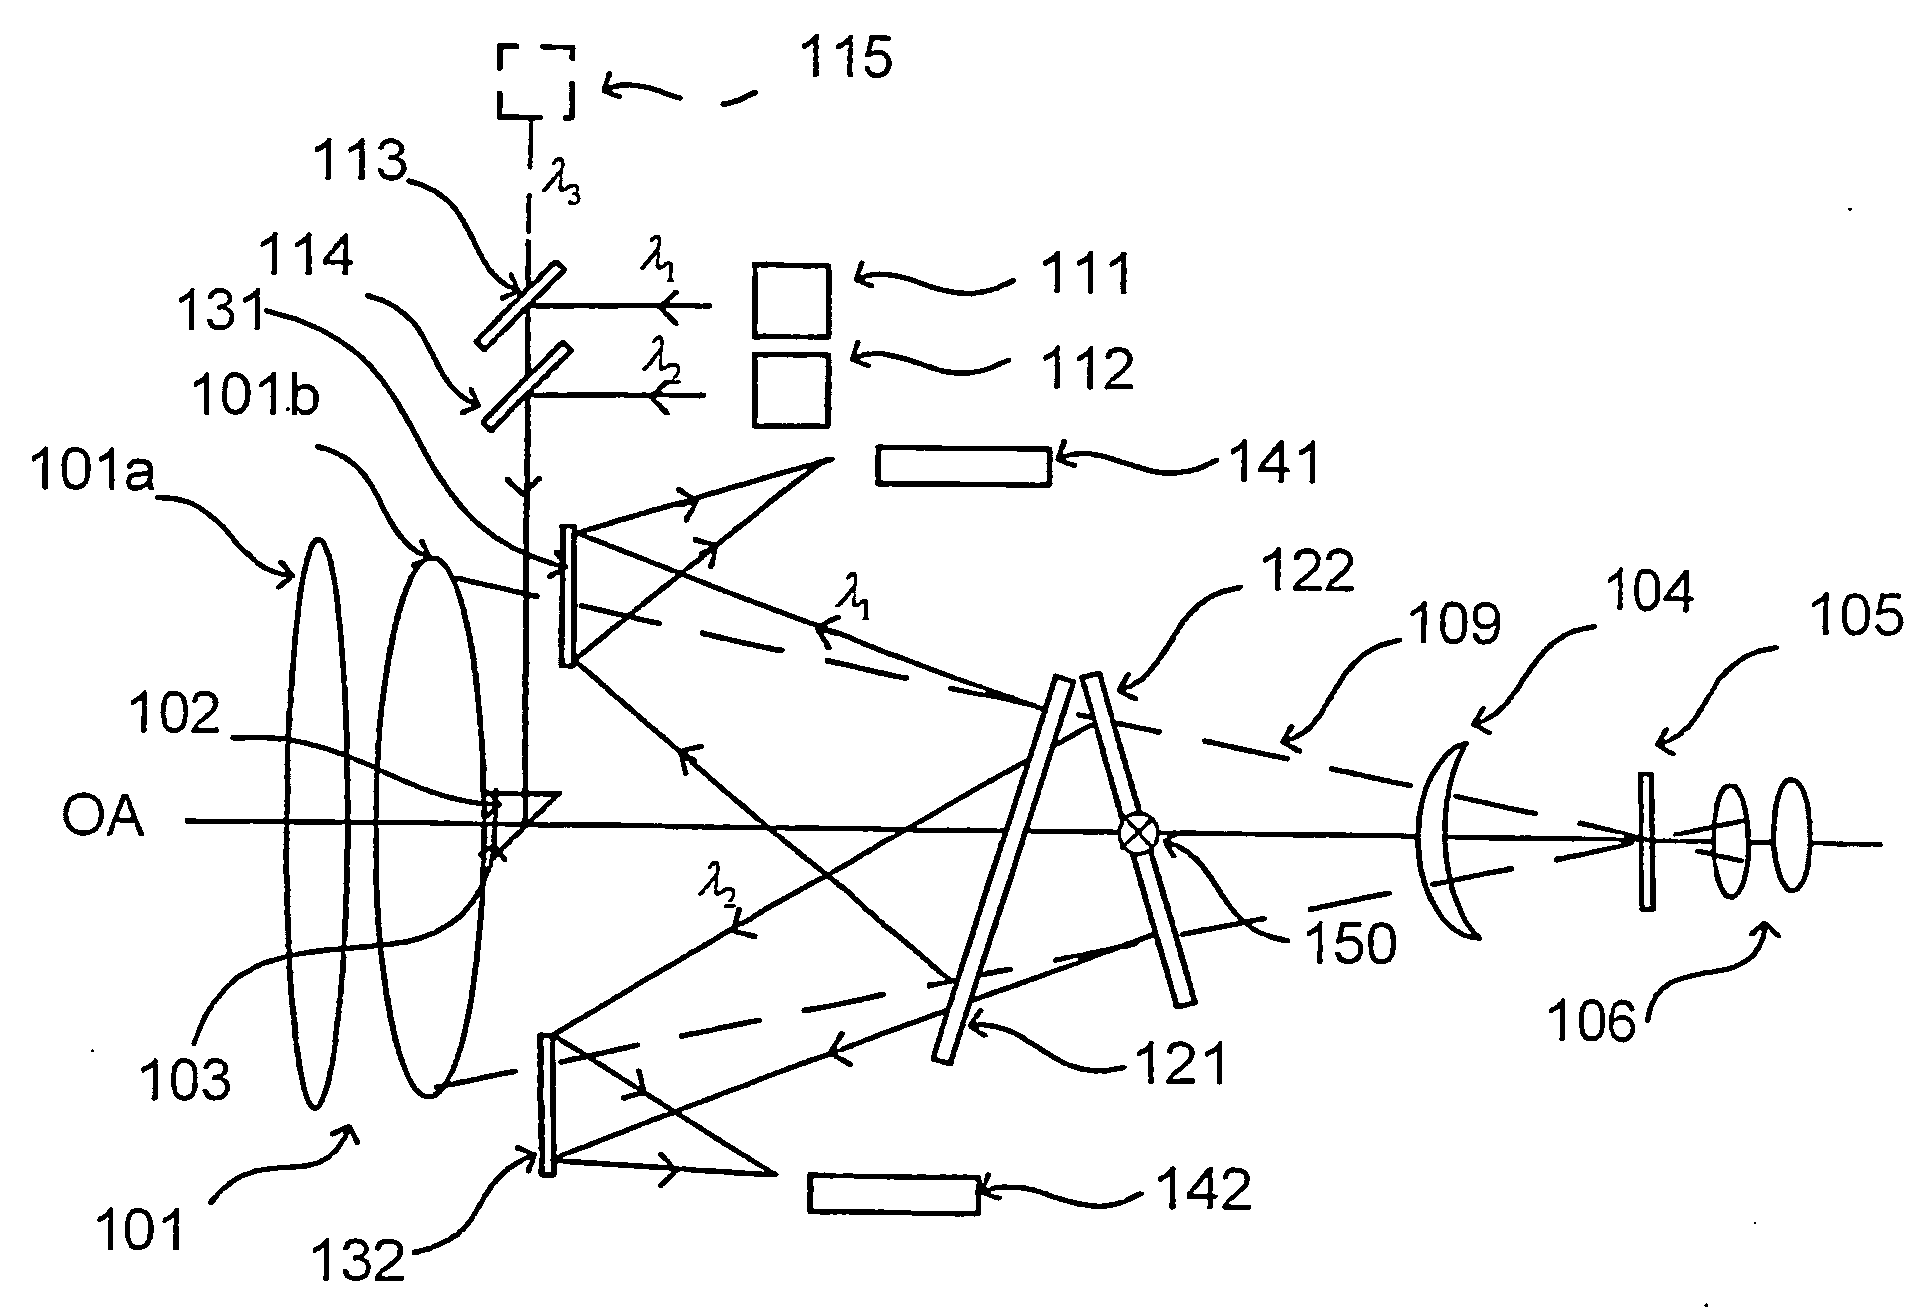 Multiple optical channels